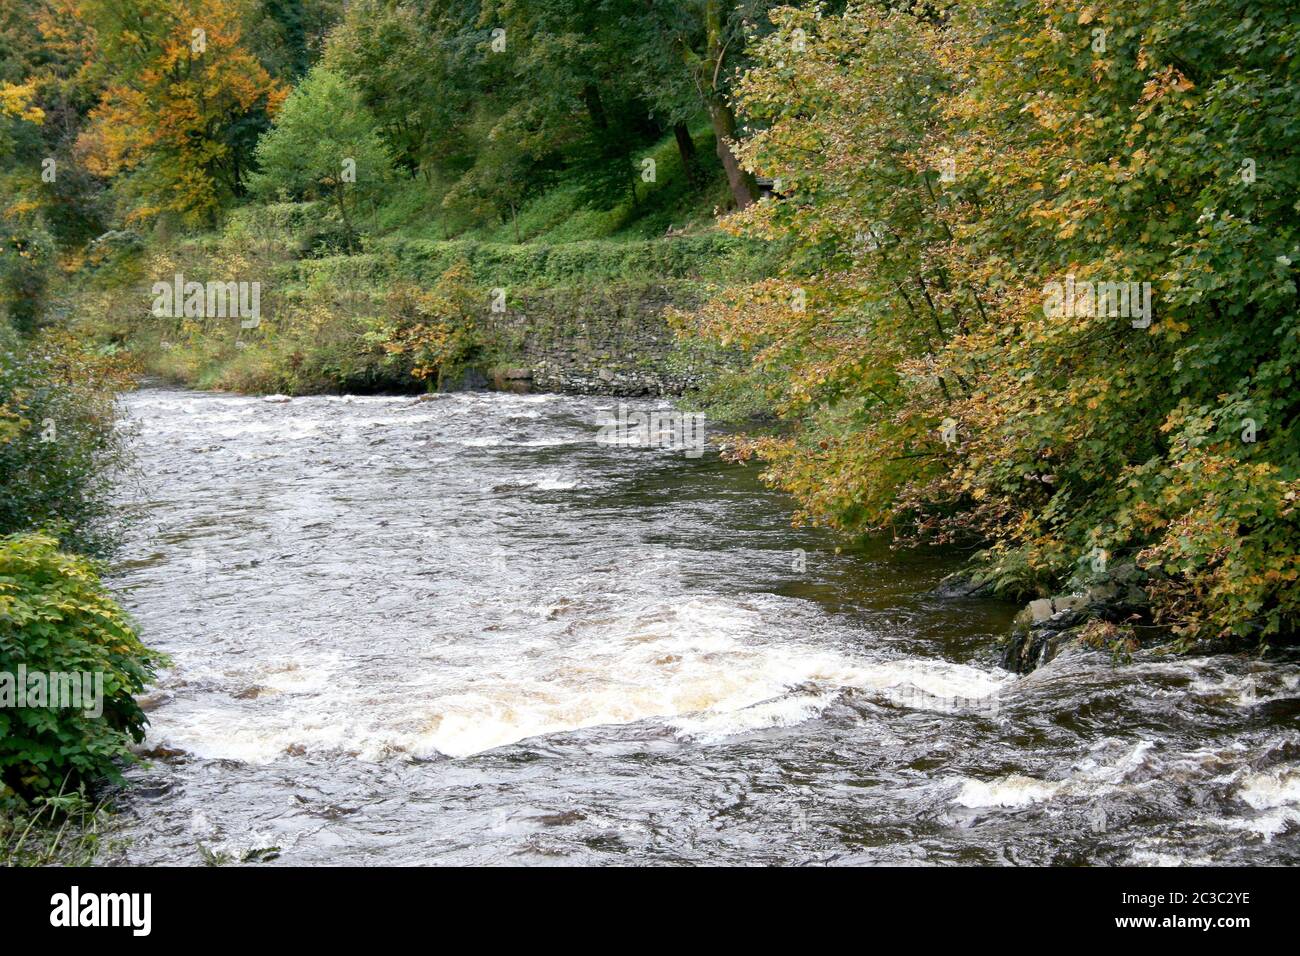 A small mountain stream with a strong current Stock Photo